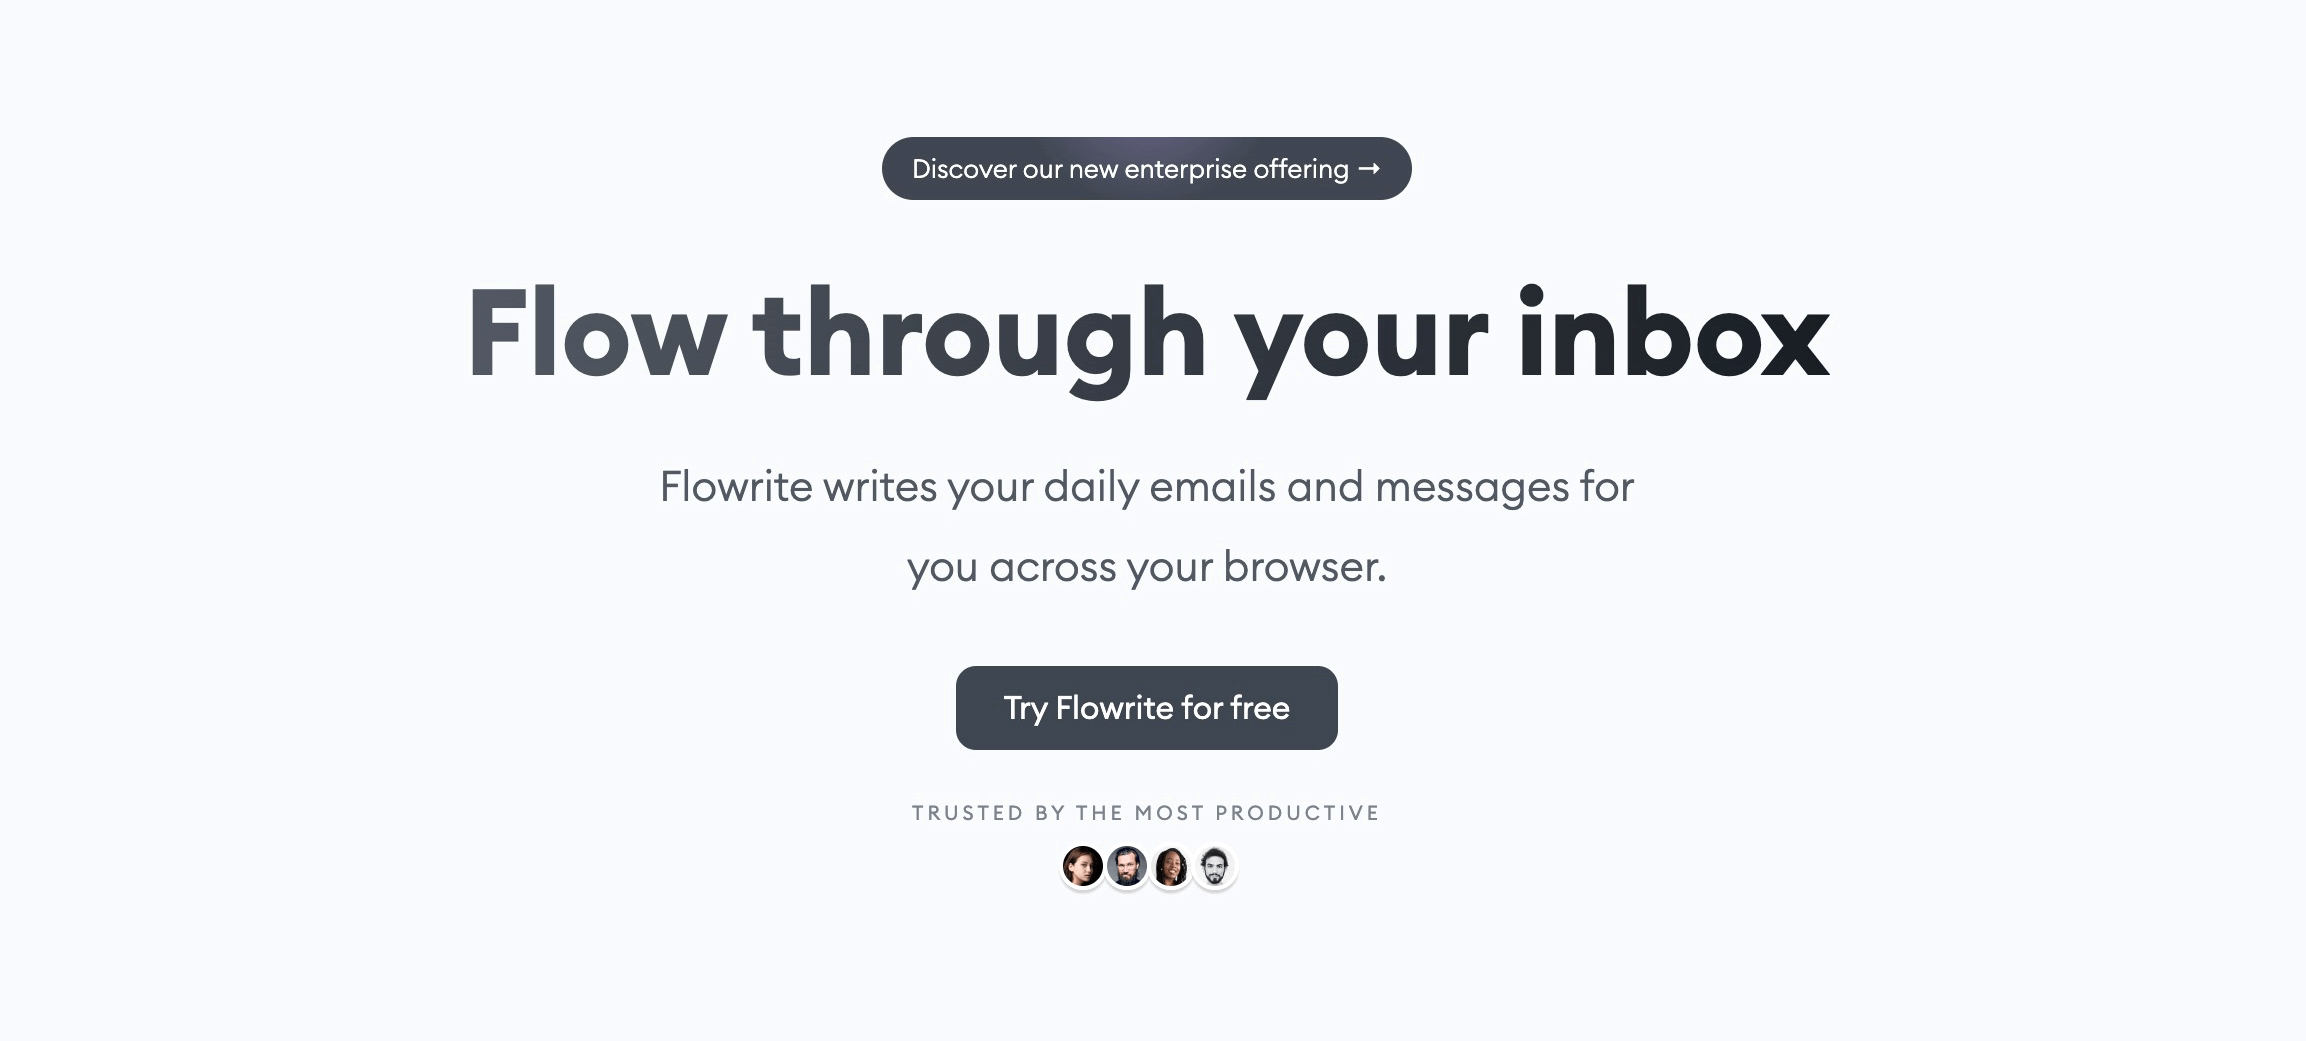 The screenshot features Flowrate's slogan “Flow through your inbox” that emphasizes their focus on writing emails.